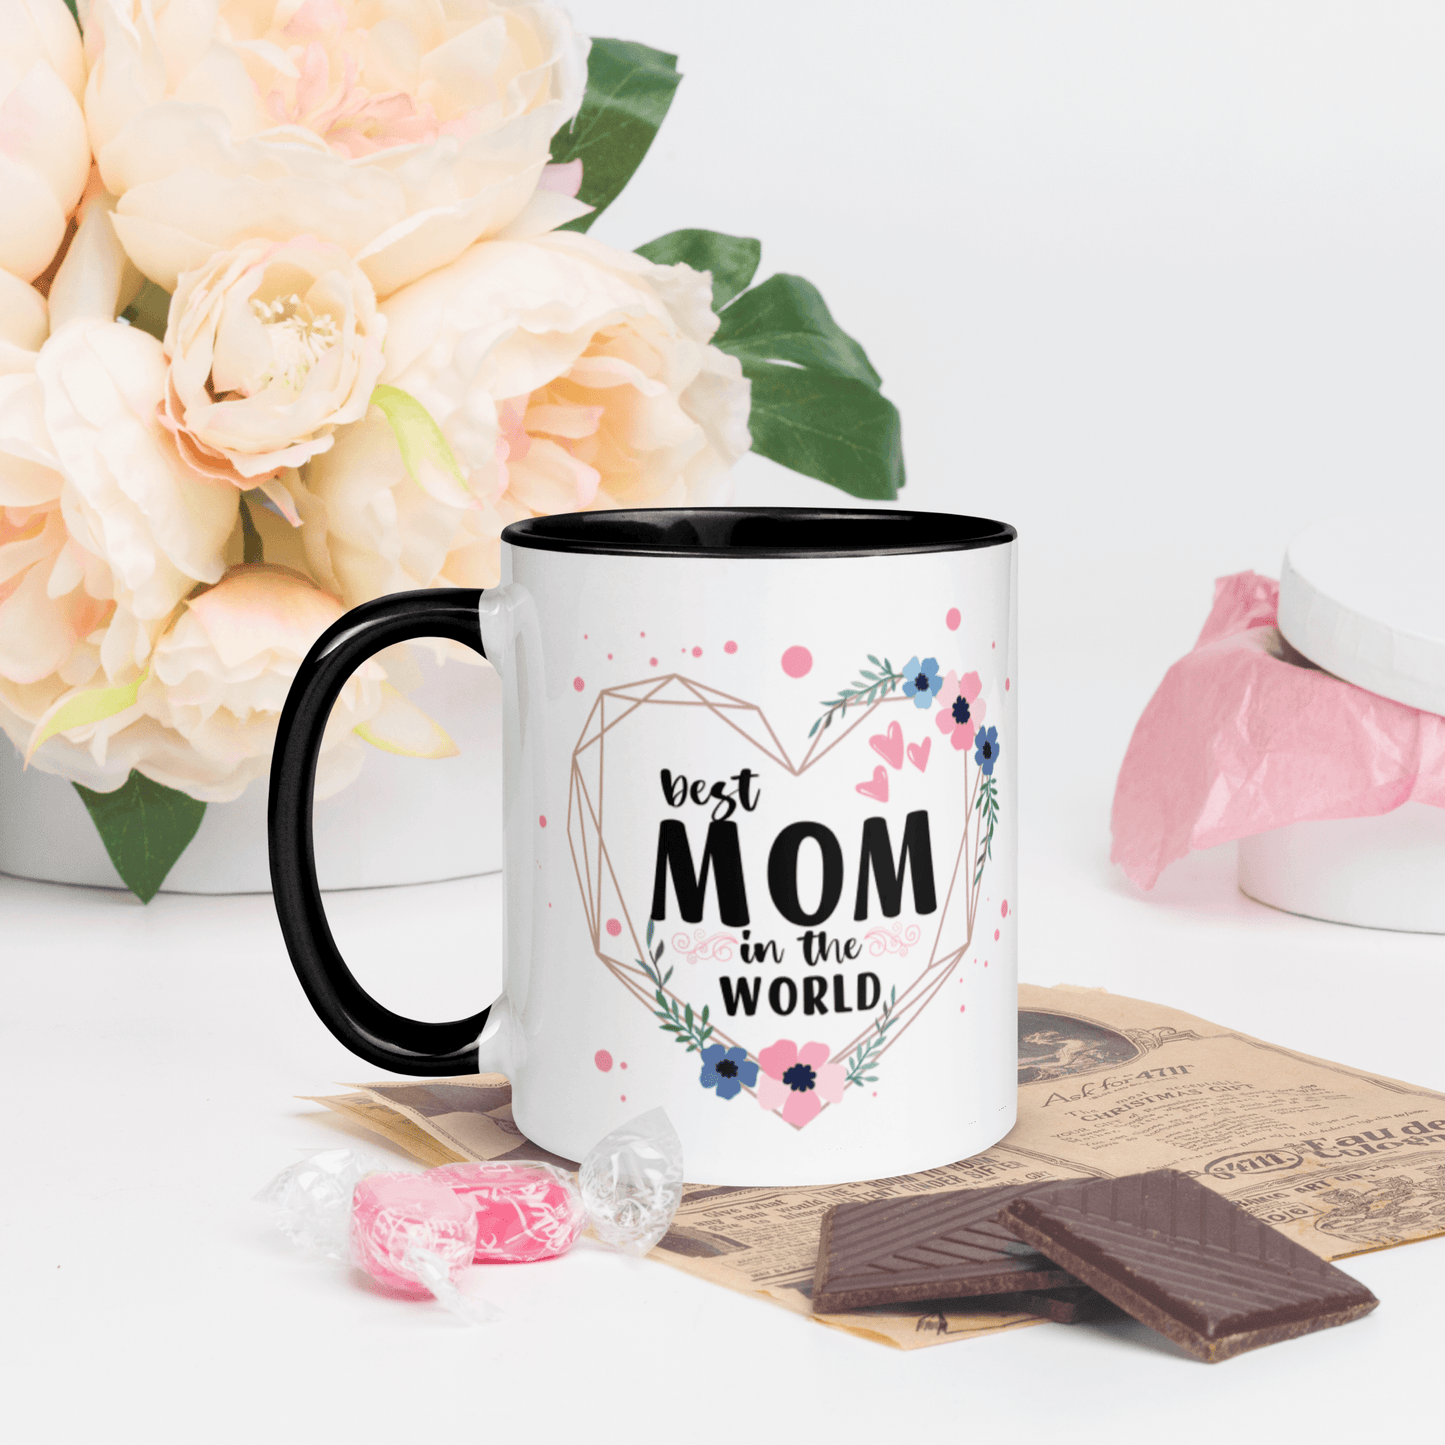 Best Mom in the World! ❤️ Ceramic Mug with Color Accent (Available in Various Colors!) - The Grateful Hearts